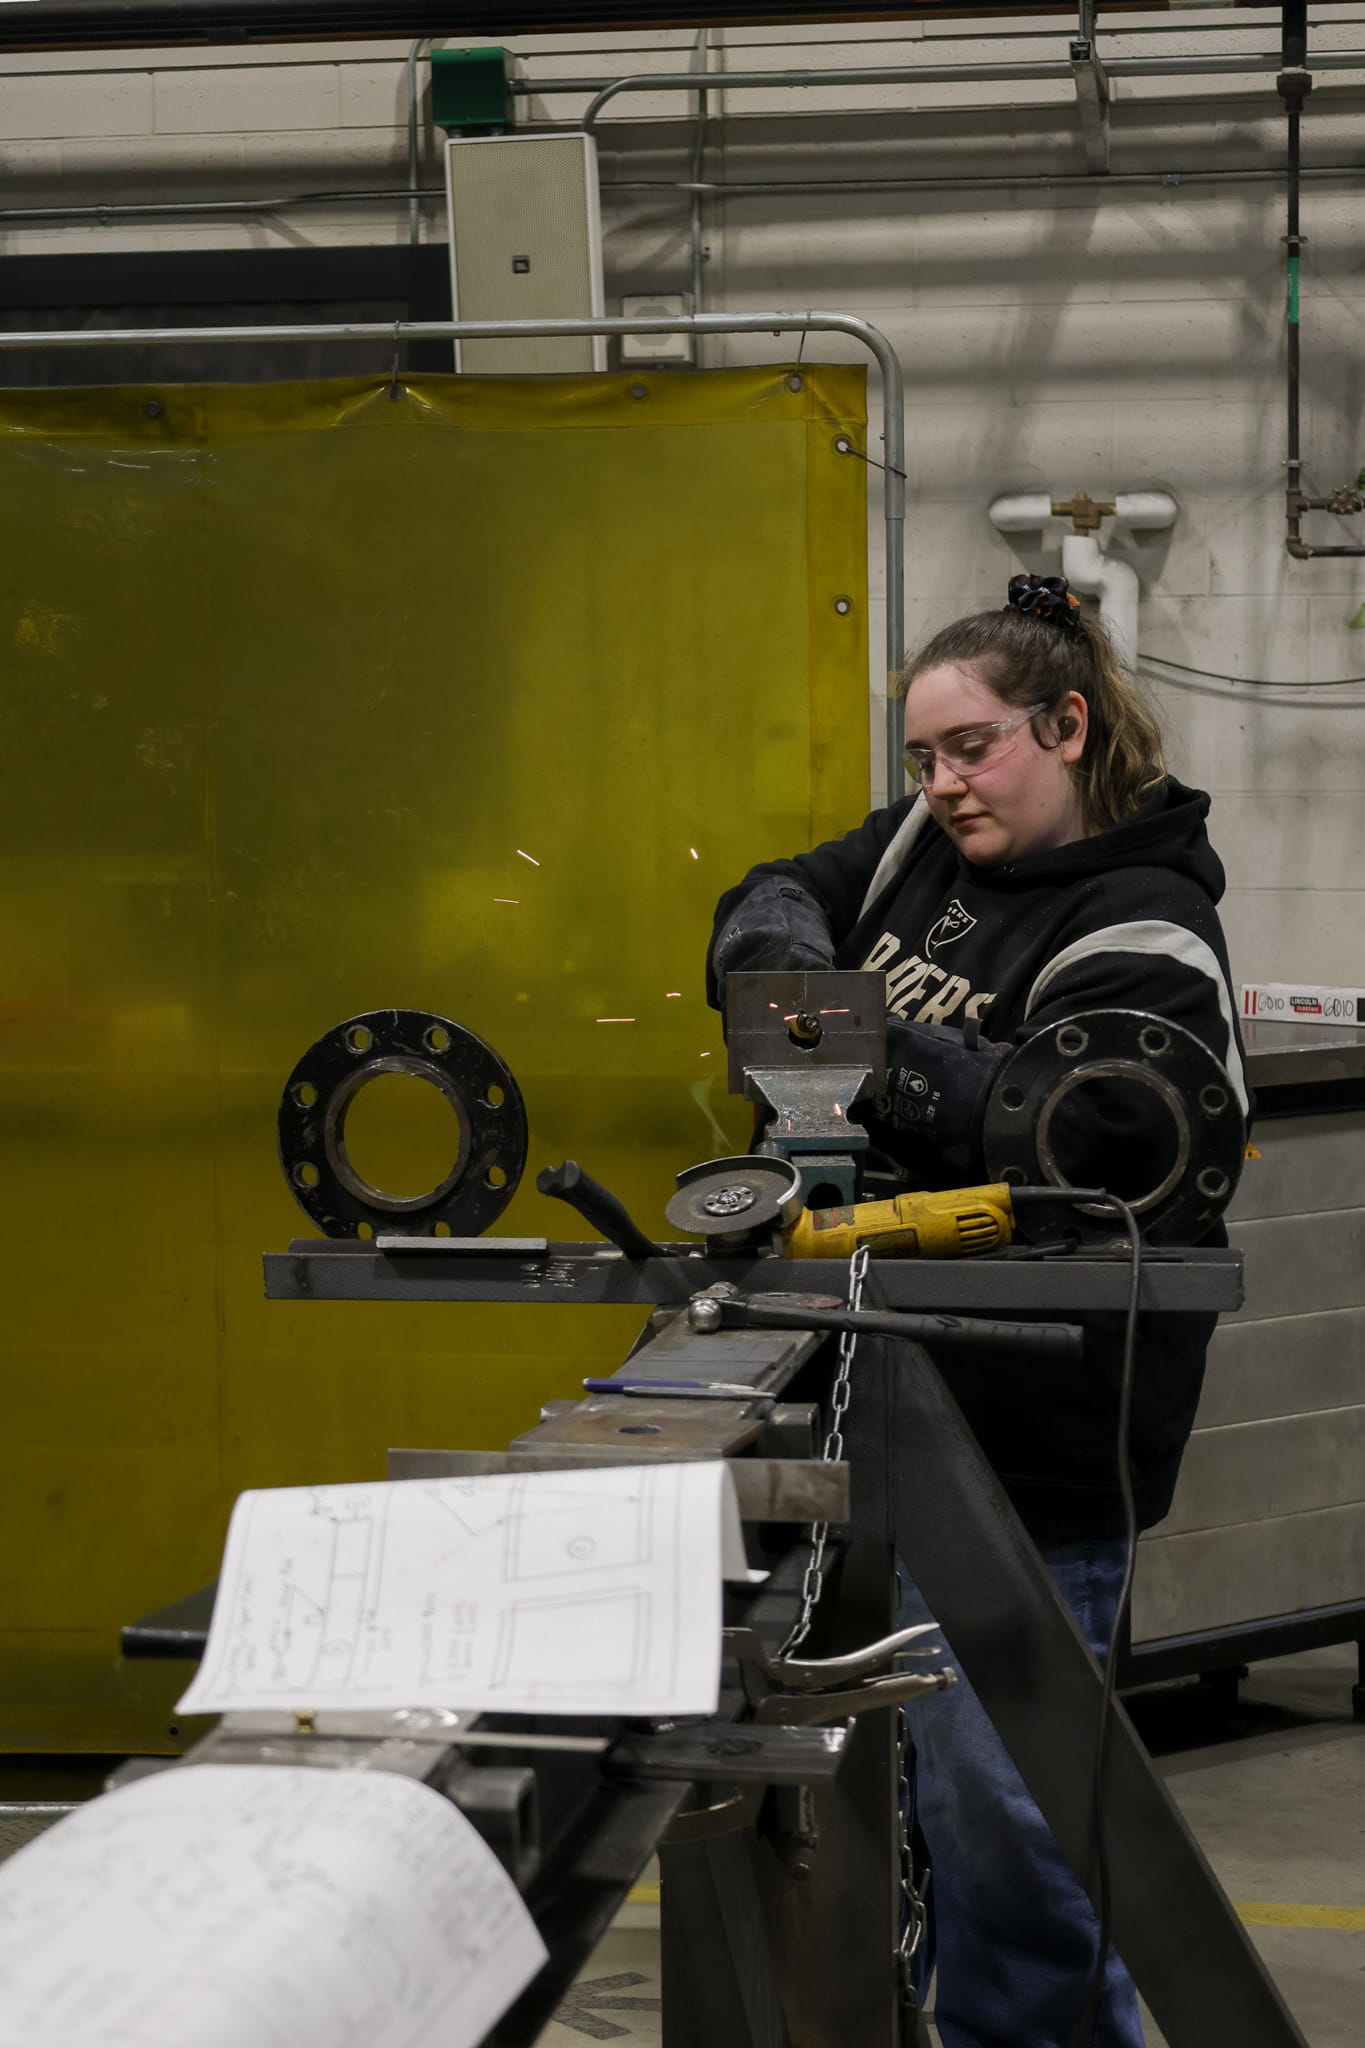 A student operates a metal grinder